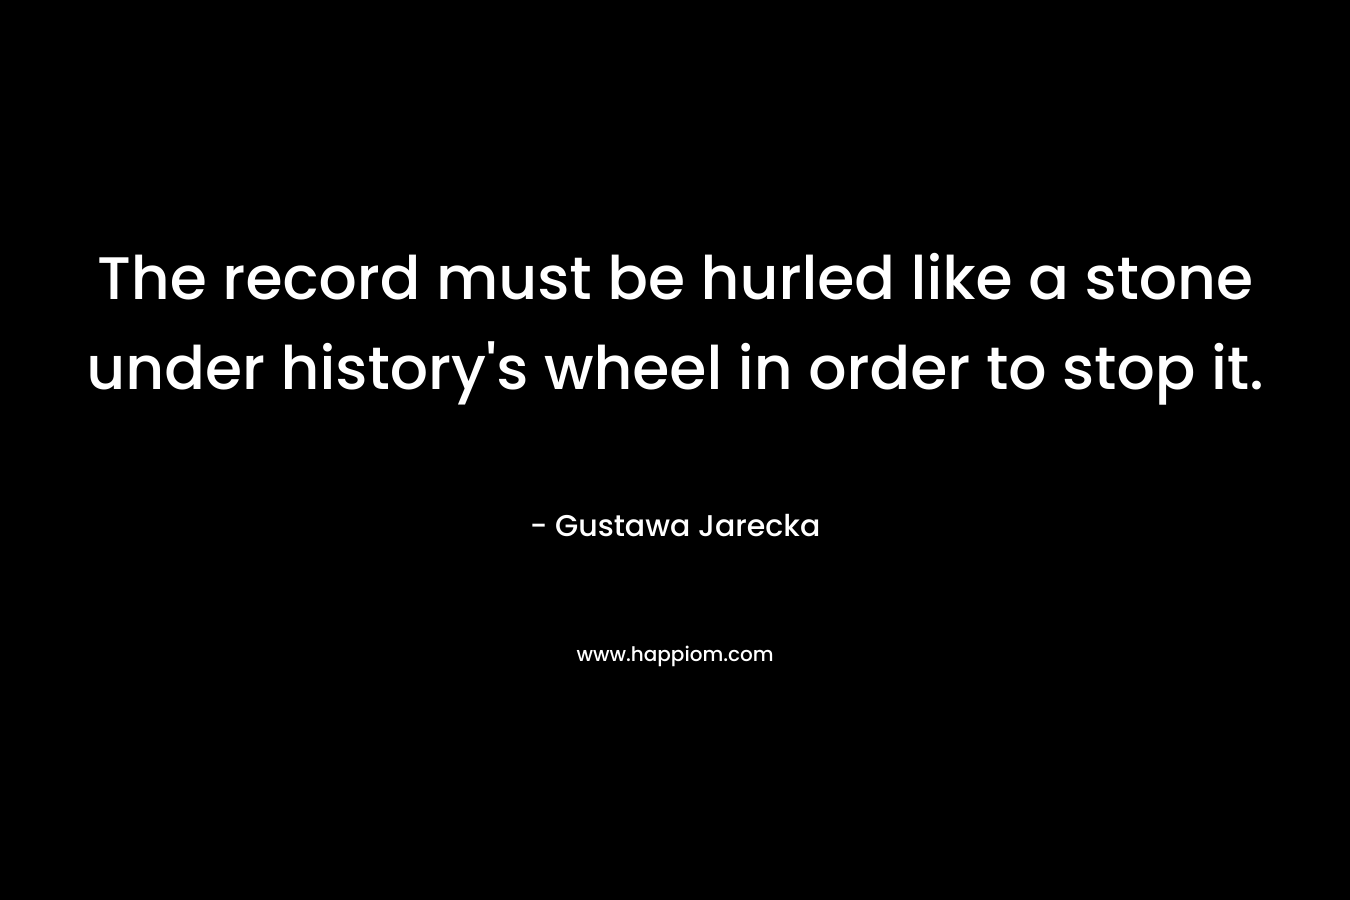 The record must be hurled like a stone under history's wheel in order to stop it.